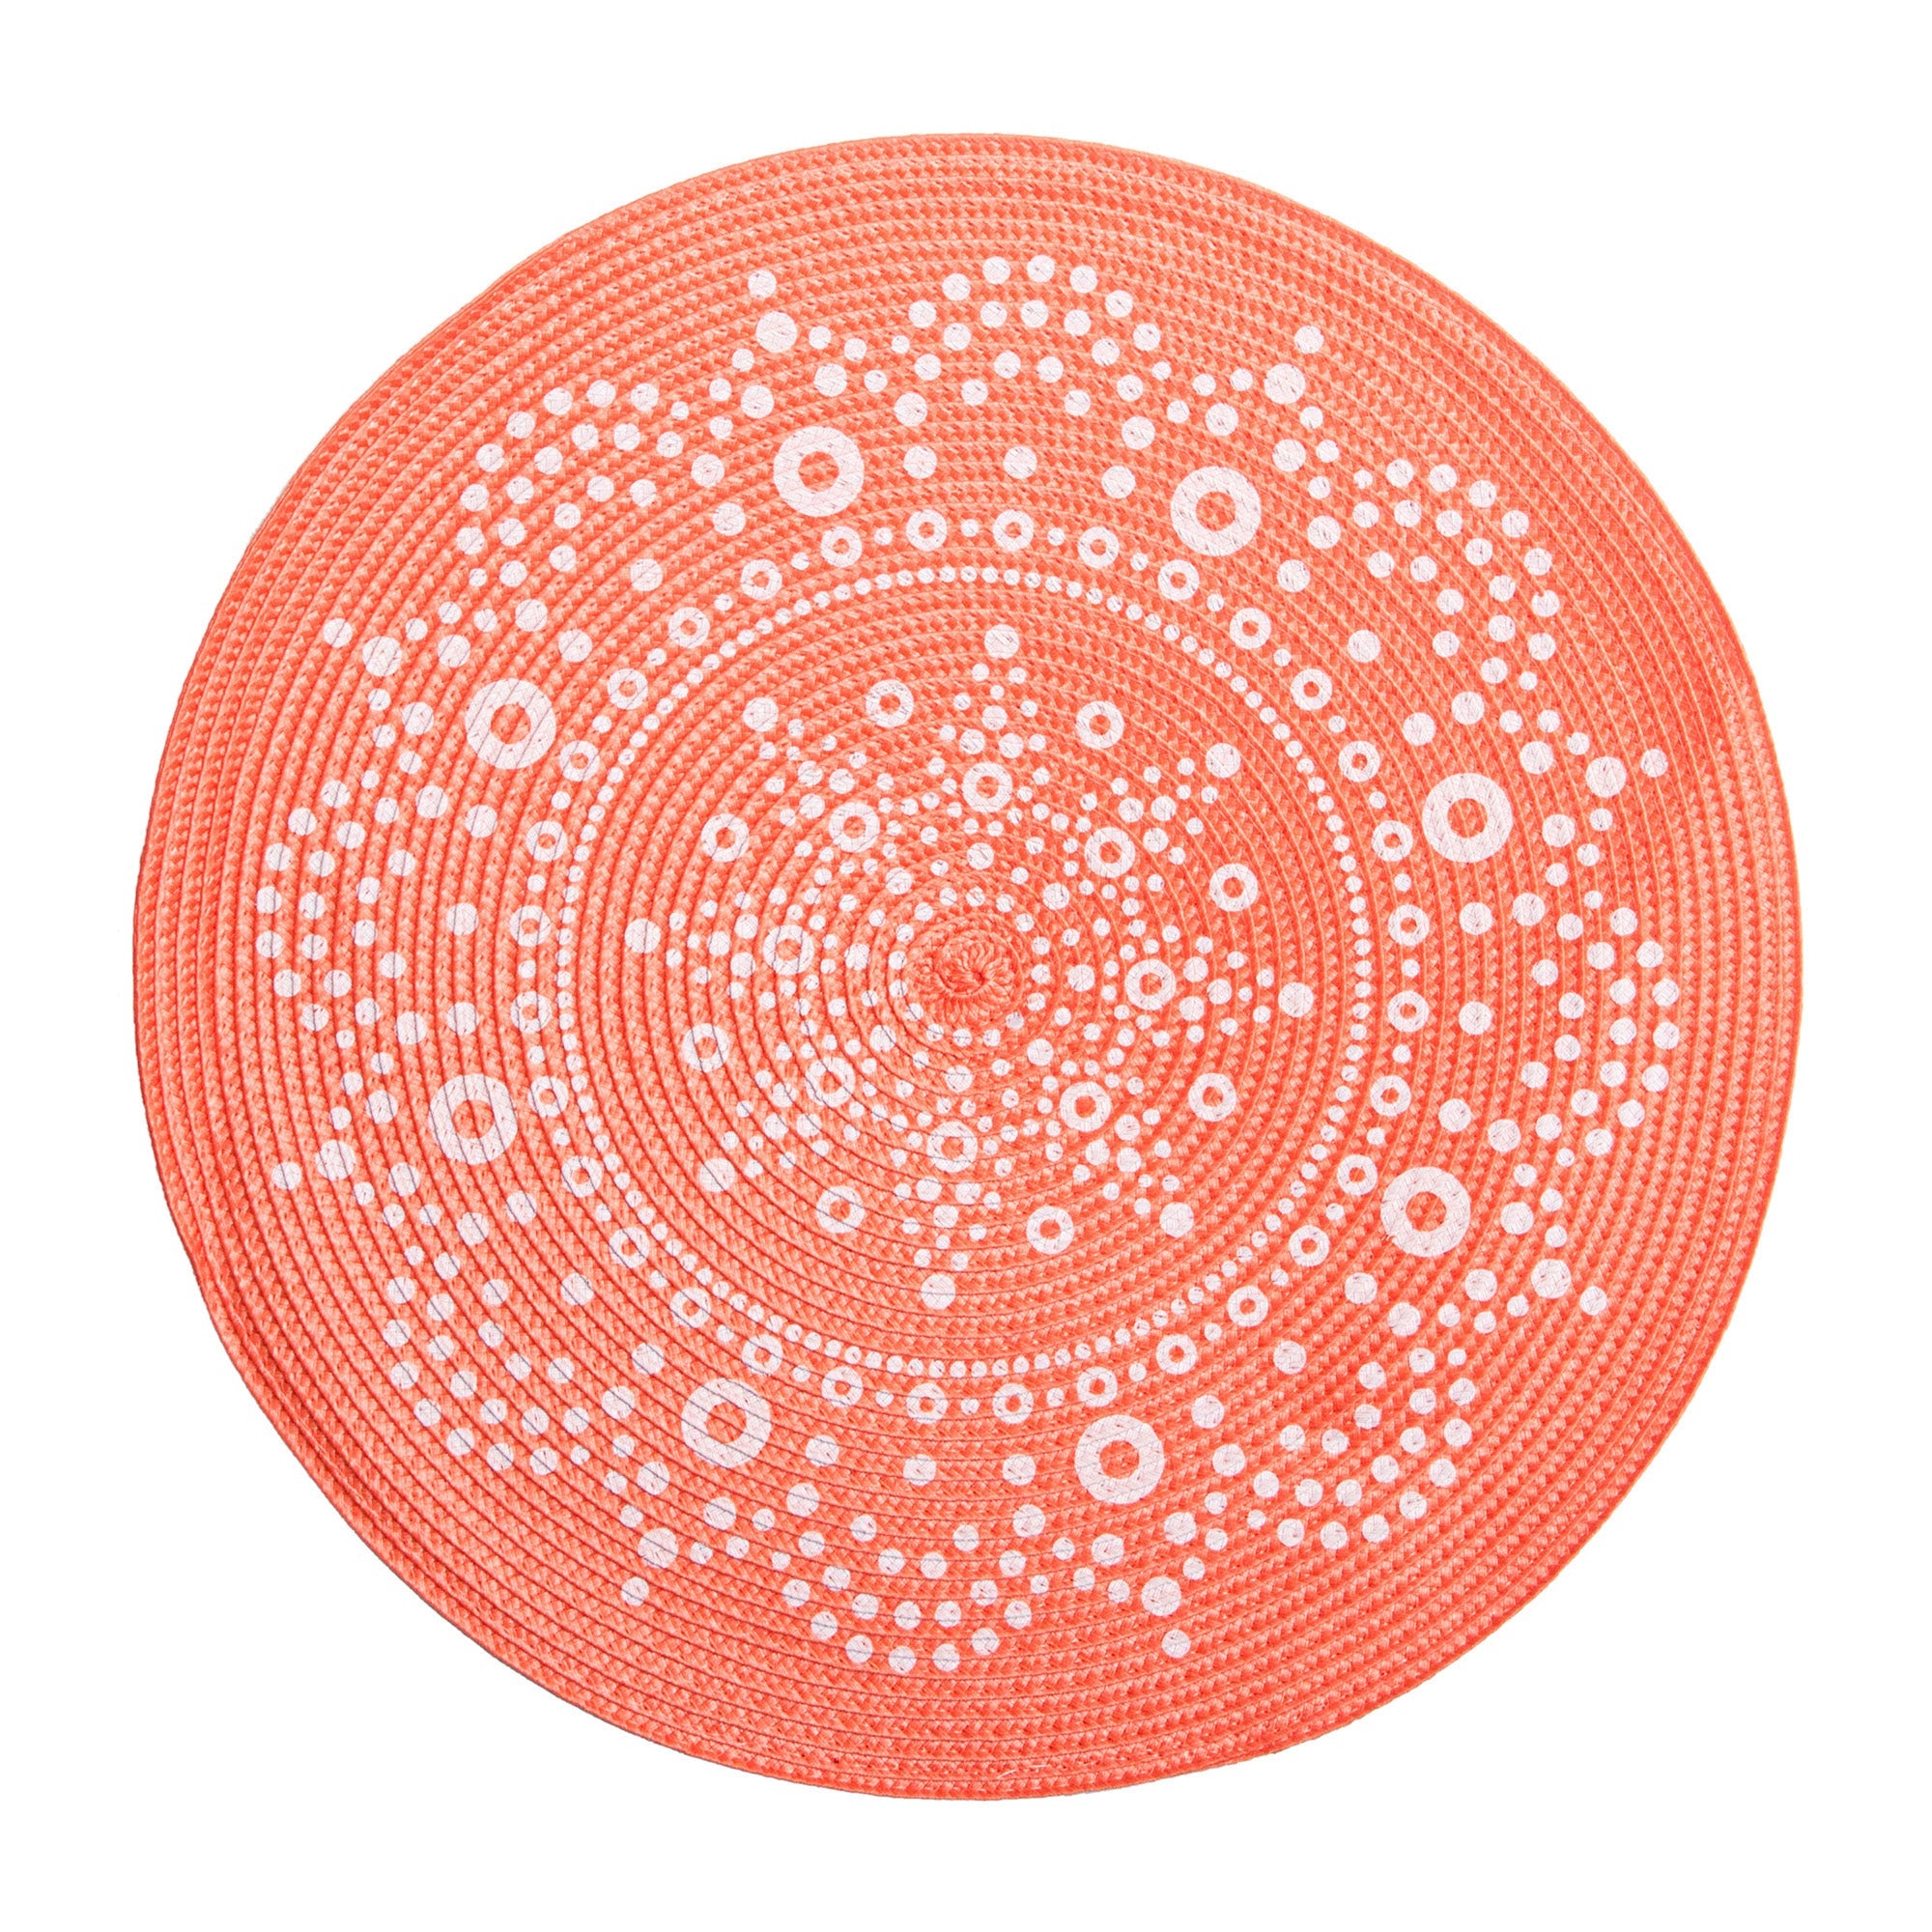 Printed Round Placemat Coral 100% Polypropylene 15in dia.  38cm dia.